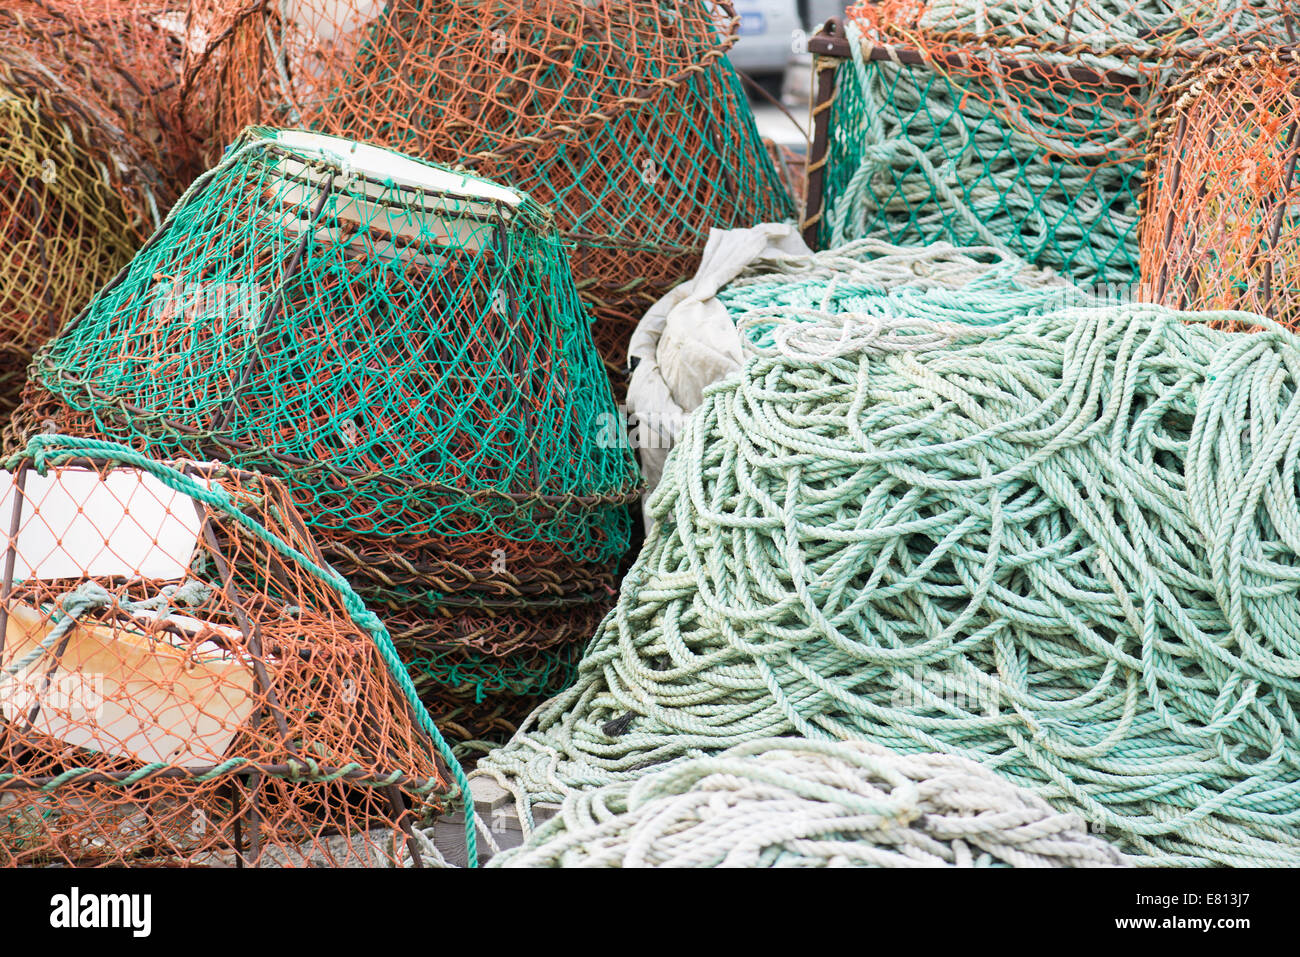 Background of fish nets and fishing equipment in green and orange